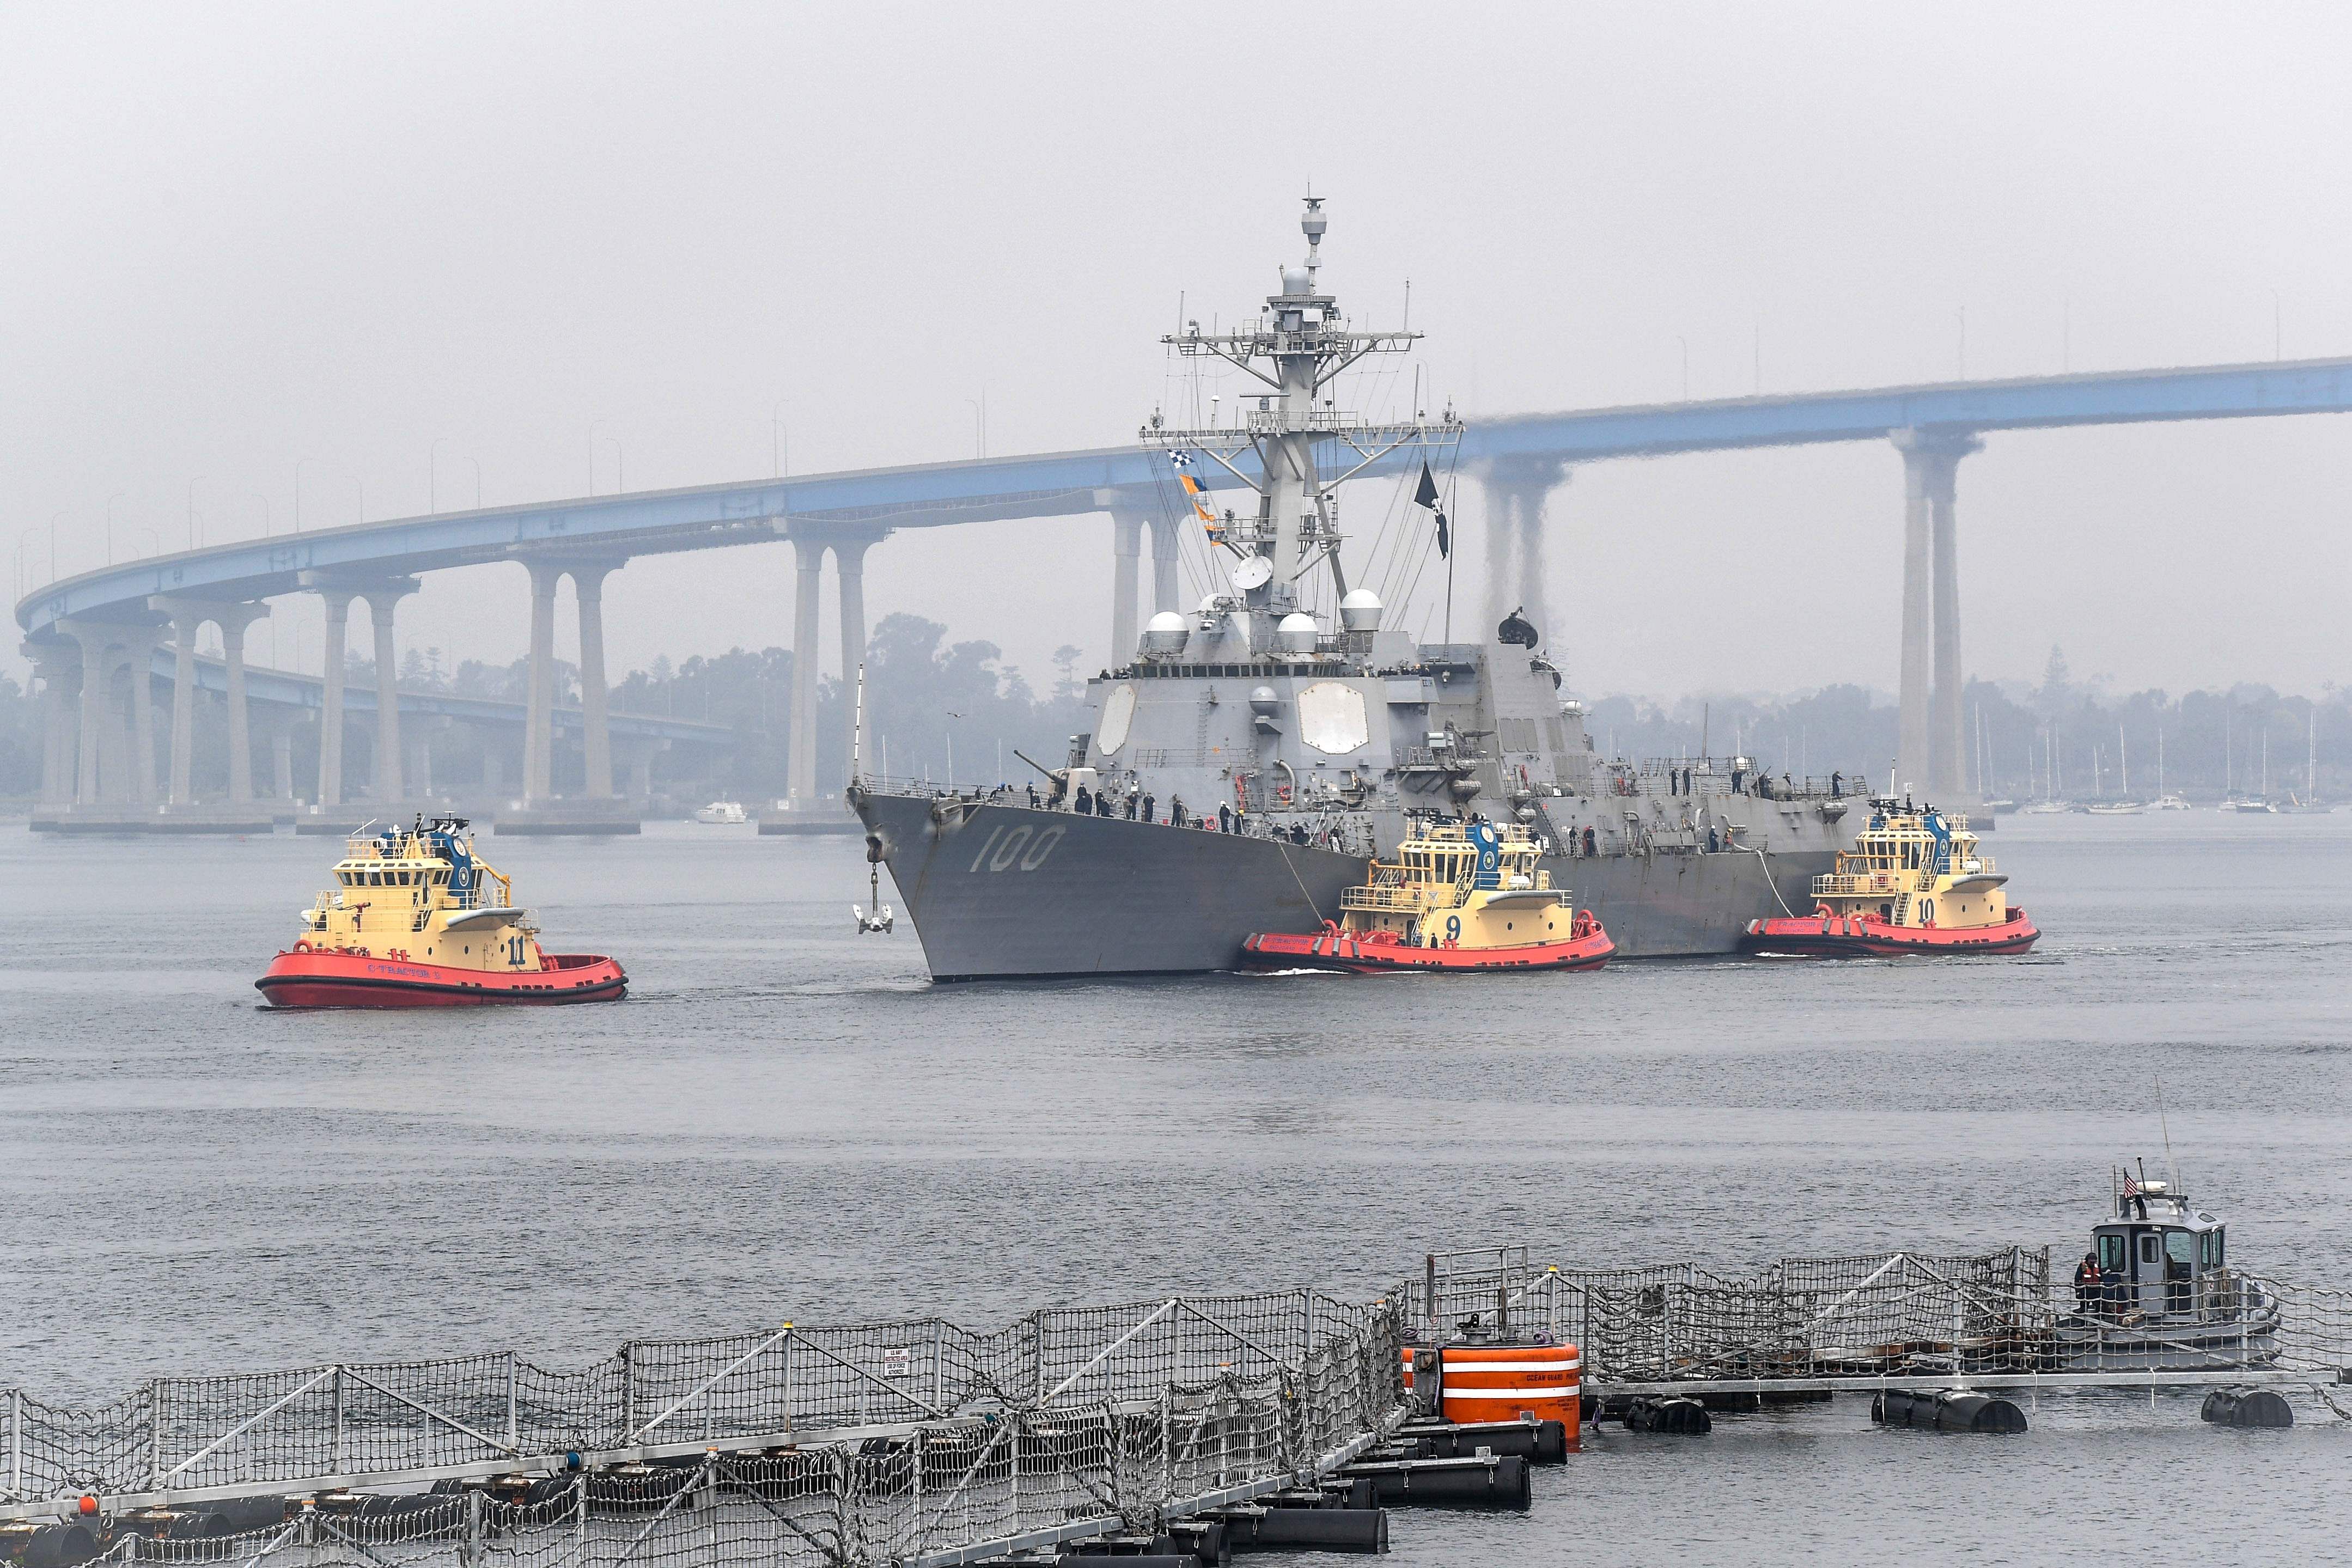 This handout photo released by the US Navy and taken on April 28, 2020 shows the guided-missile destroyer USS Kidd (DDG 100) arriving in San Diego as part of the Navy’s aggressive response to the COVID-19 outbreak on board the ship. (AFP)